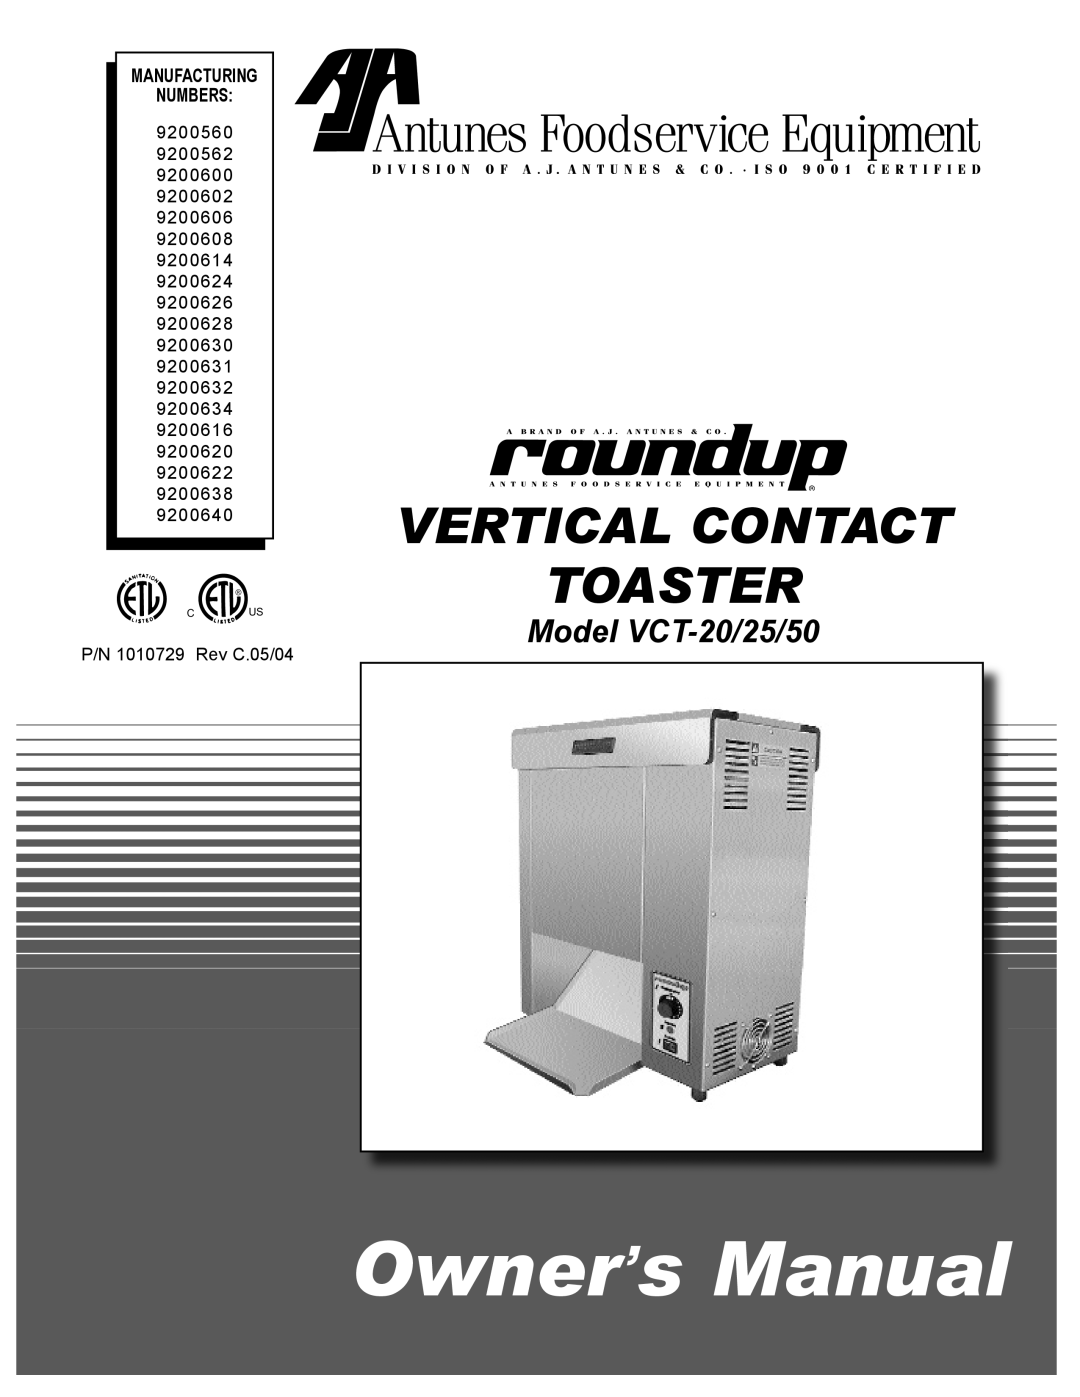 Antunes, AJ VCT-50, VCT-25 owner manual Vertical Contact Toaster, Model VCT-20/25/50, Manufacturing Numbers, C Us 